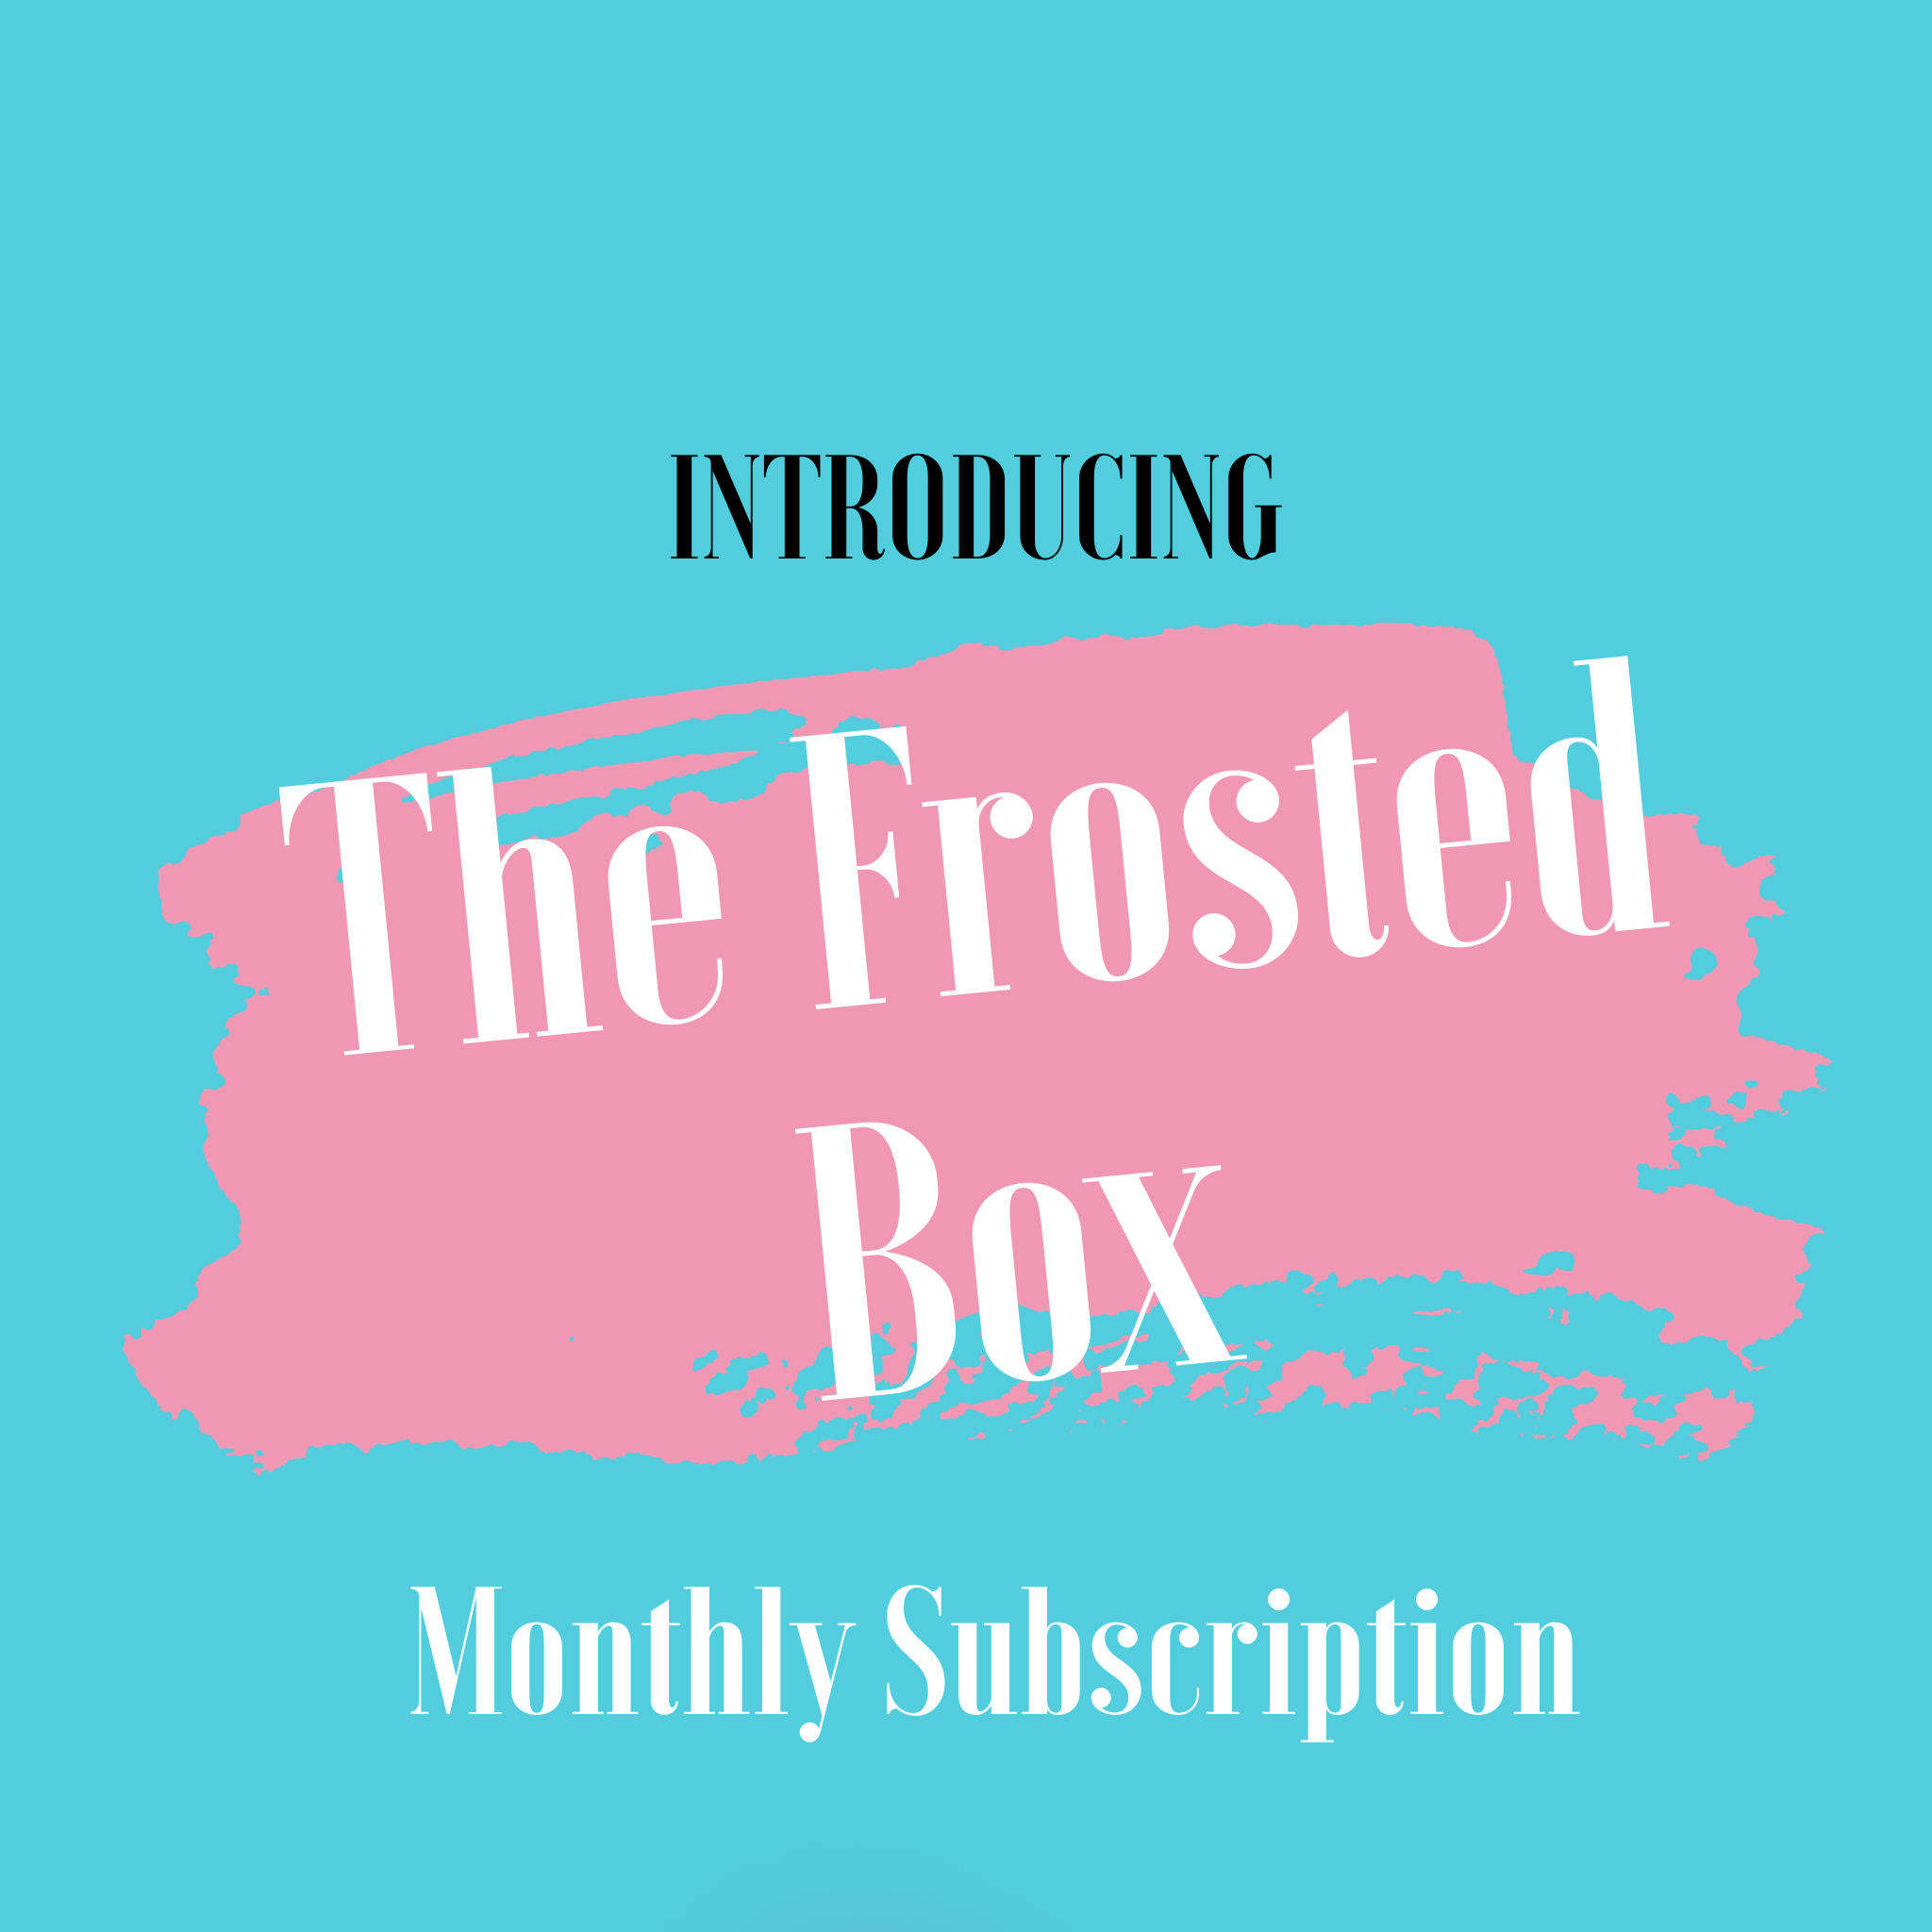 The Frosted Box